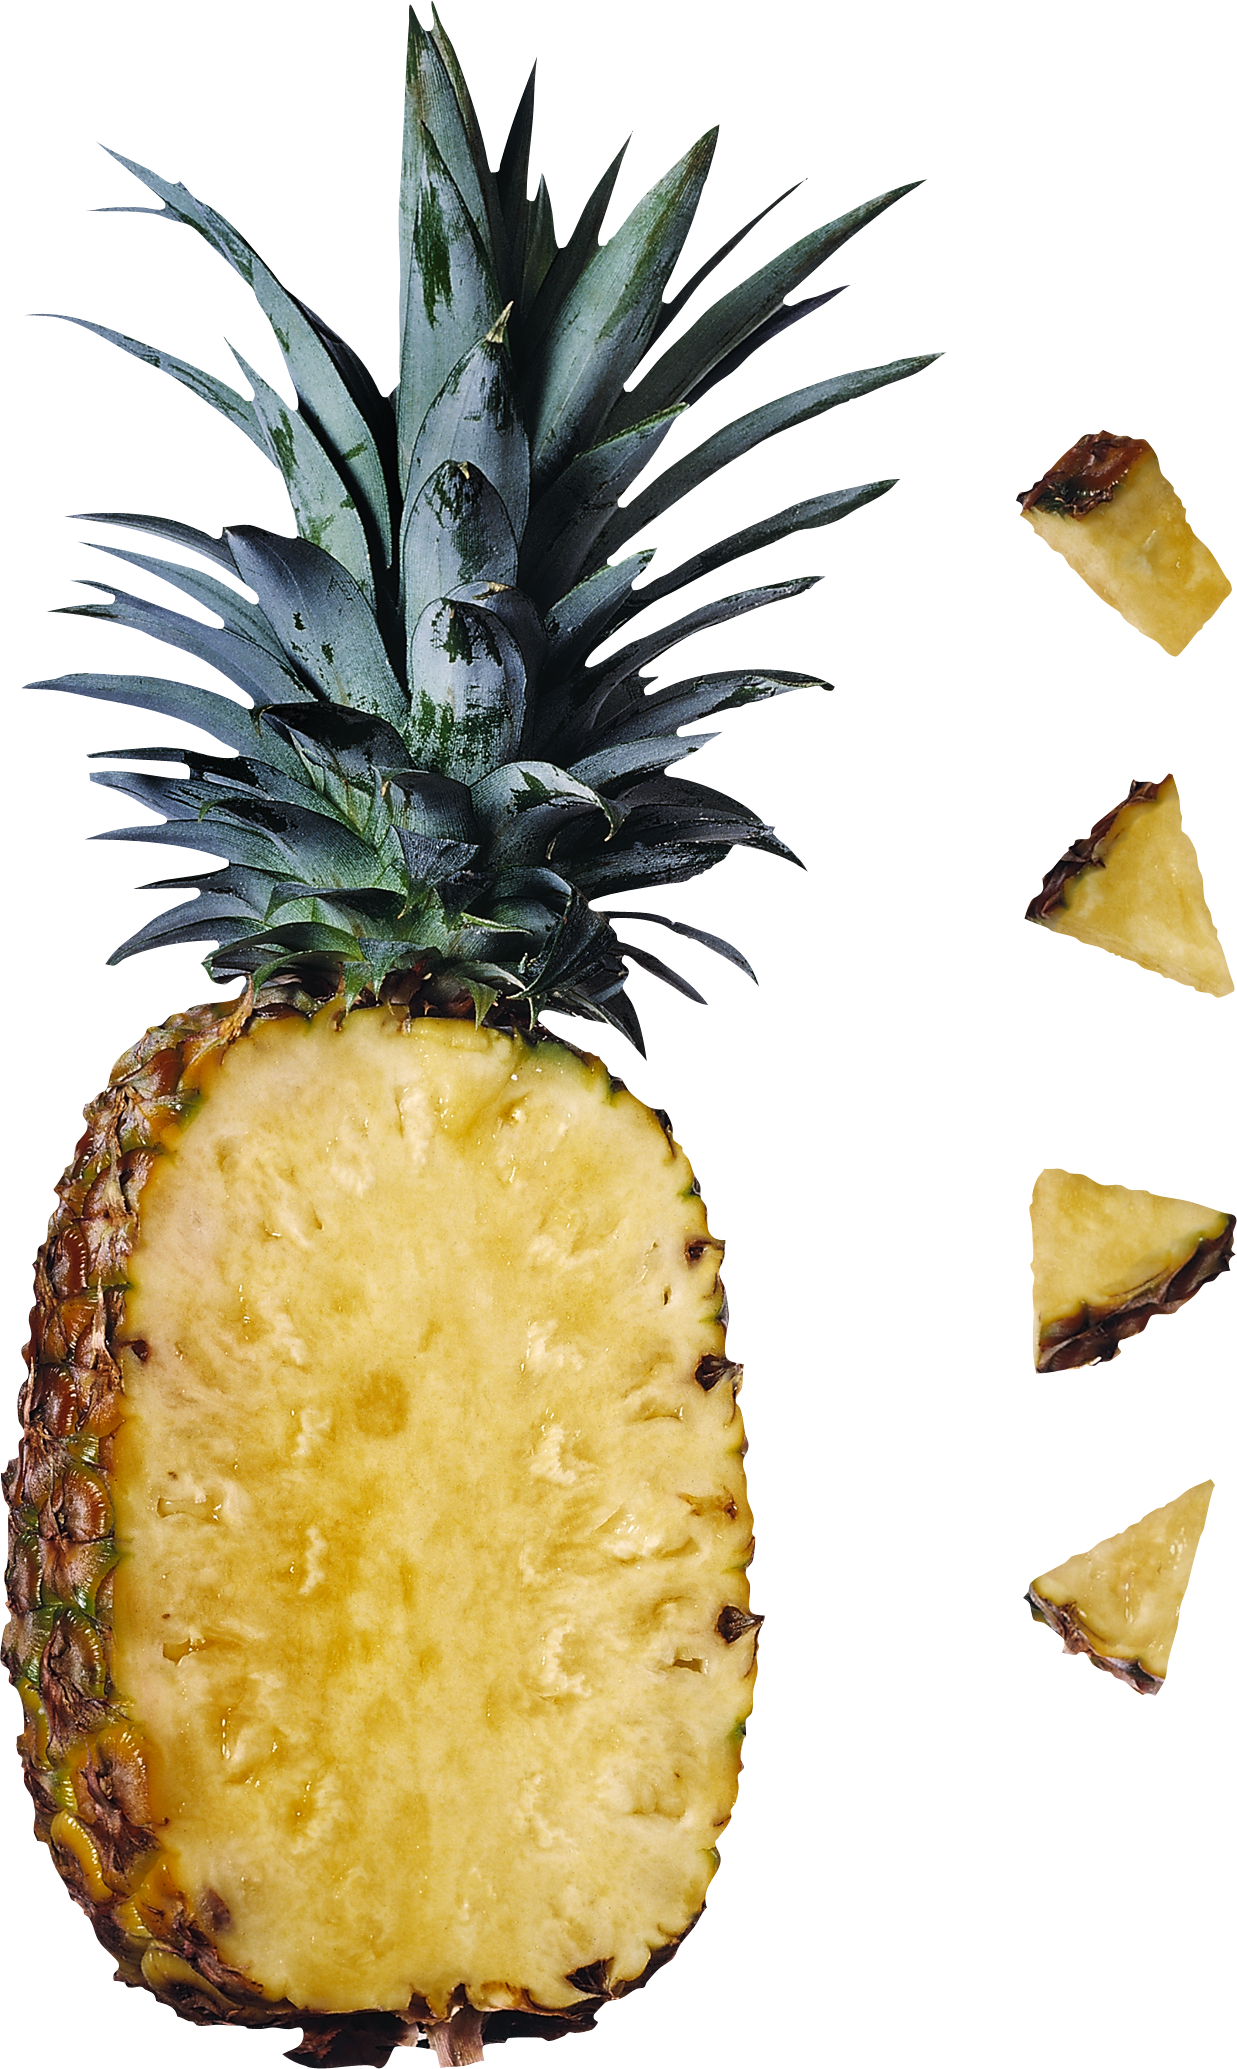 Pineapple PNG image, free download